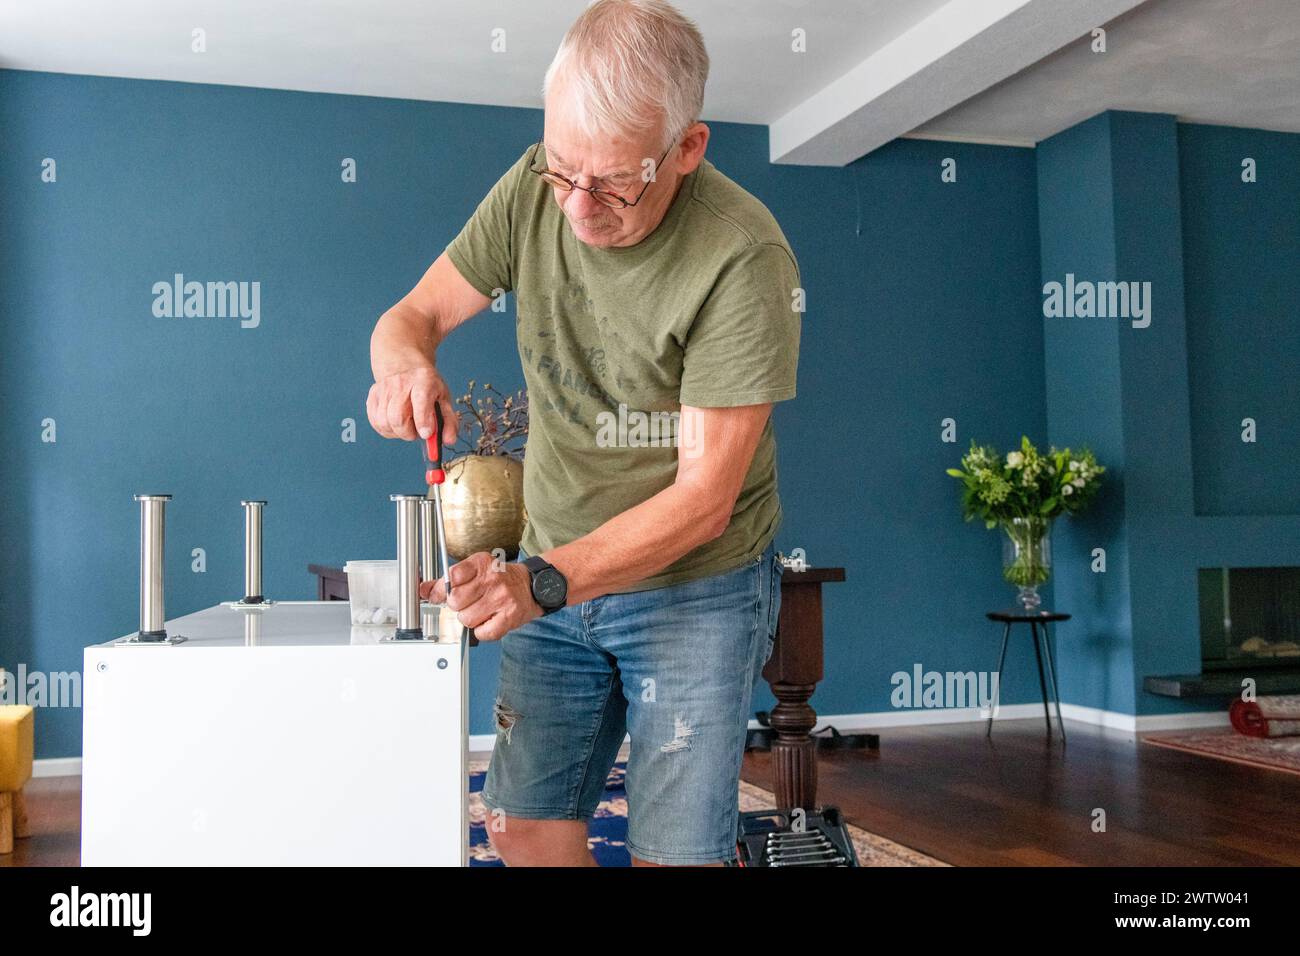 Senior man focused on a DIY project at home Stock Photo